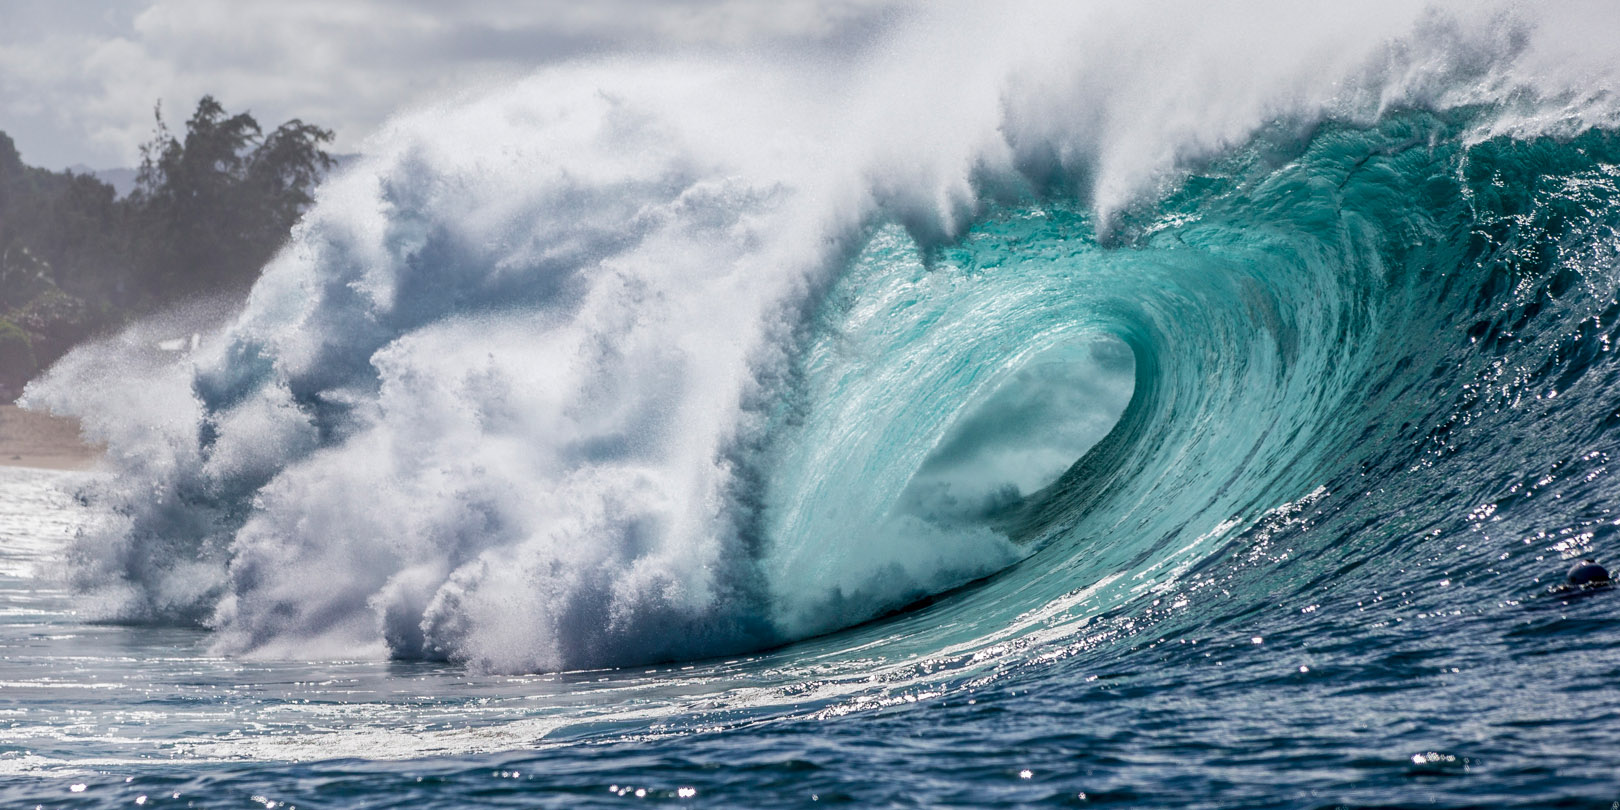 Pipeline. The World’s Scariest, Biggest Waves And Surf Spots